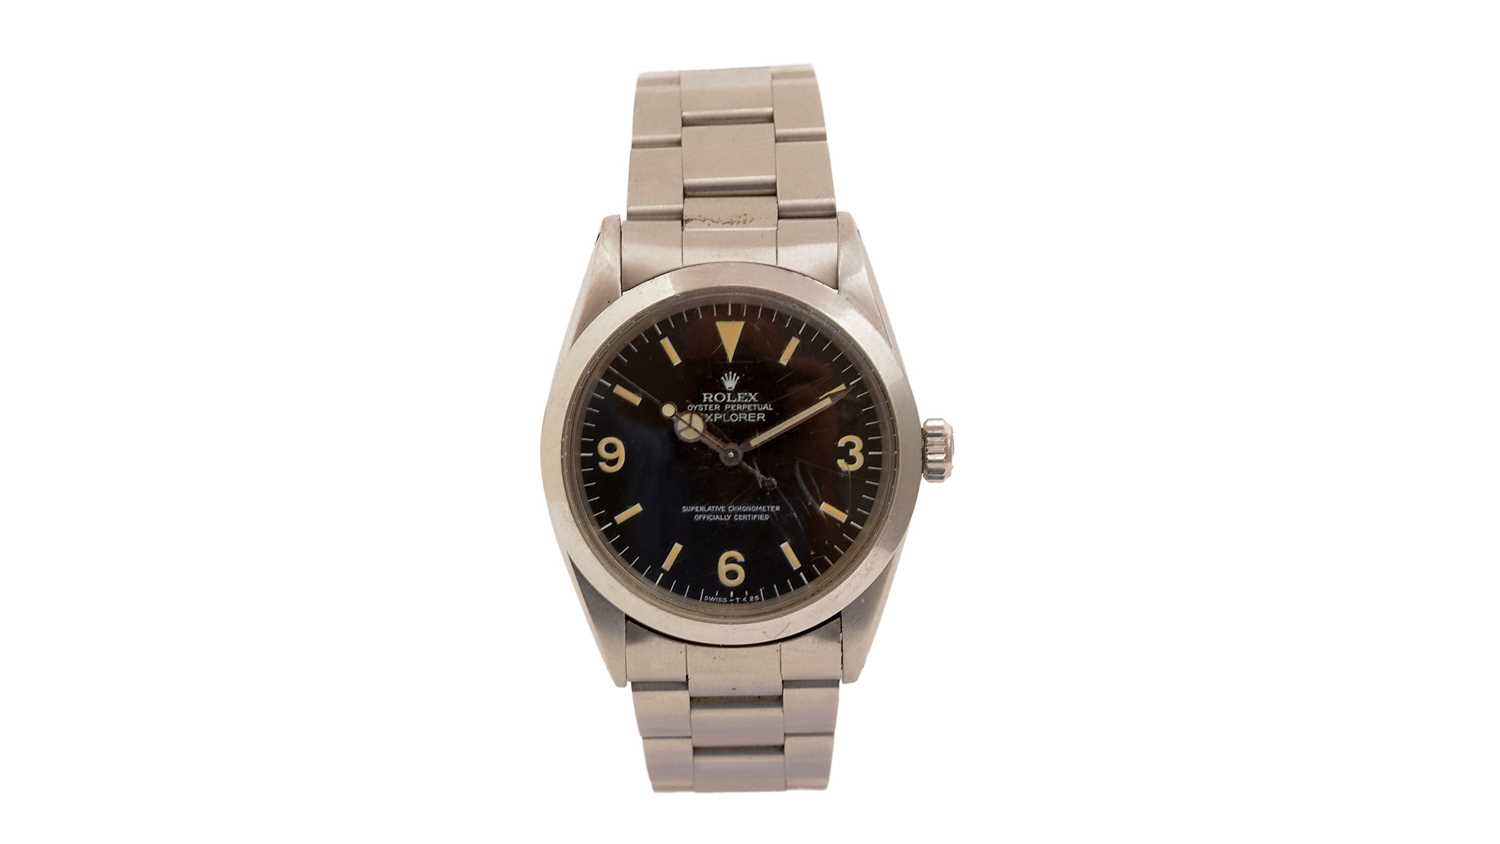 Lot 578 - Rolex Oyster Perpetual Explorer: a steel cased automatic wristwatch, ref 1016